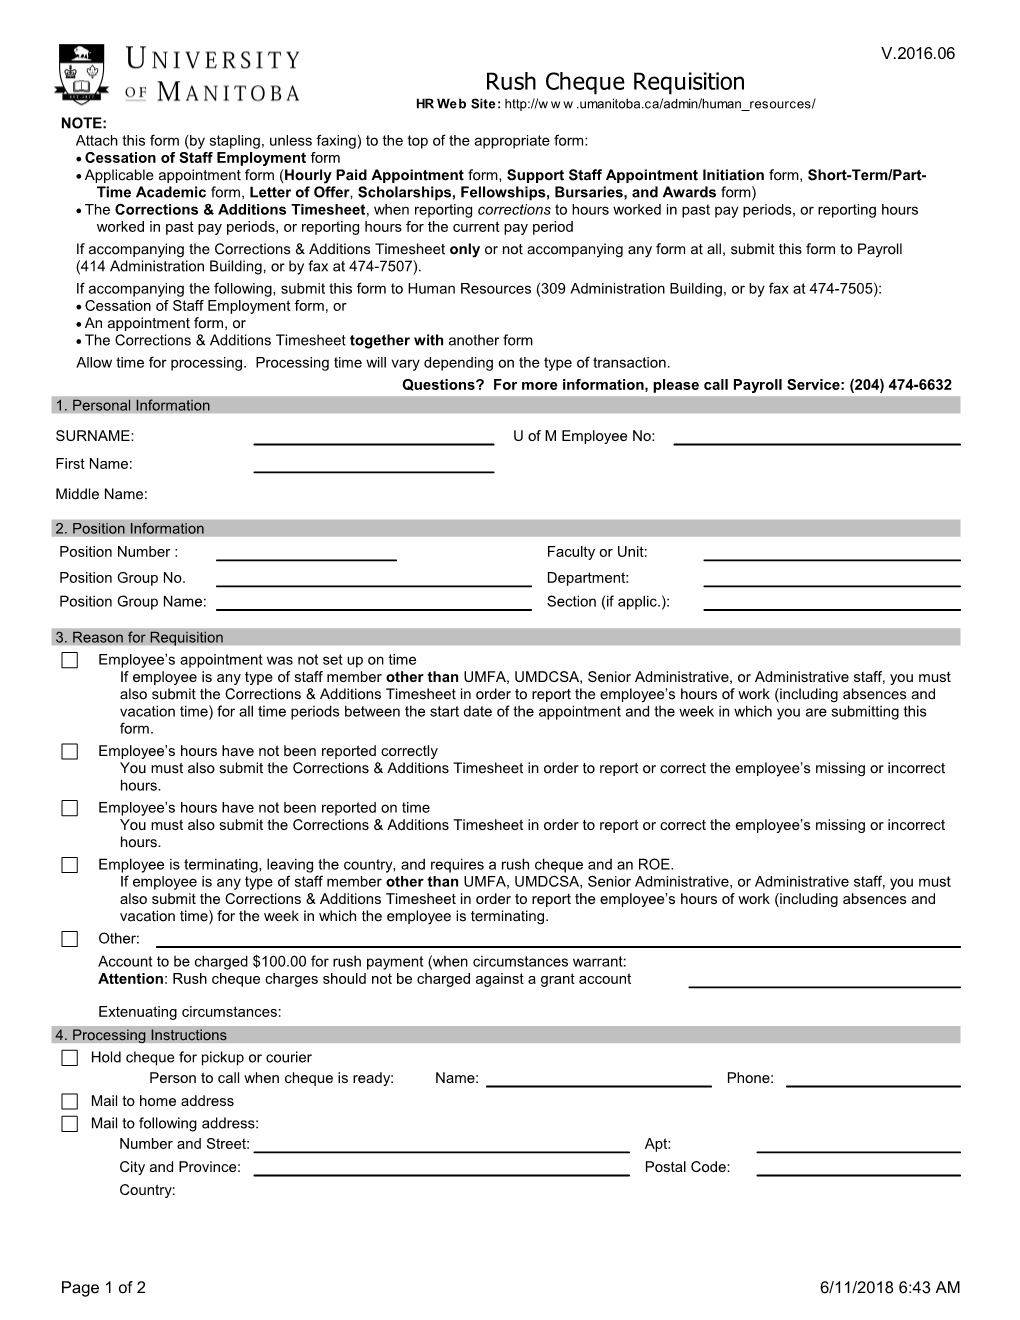 Attach This Form (By Stapling, Unless Faxing) to the Top of the Appropriate Form